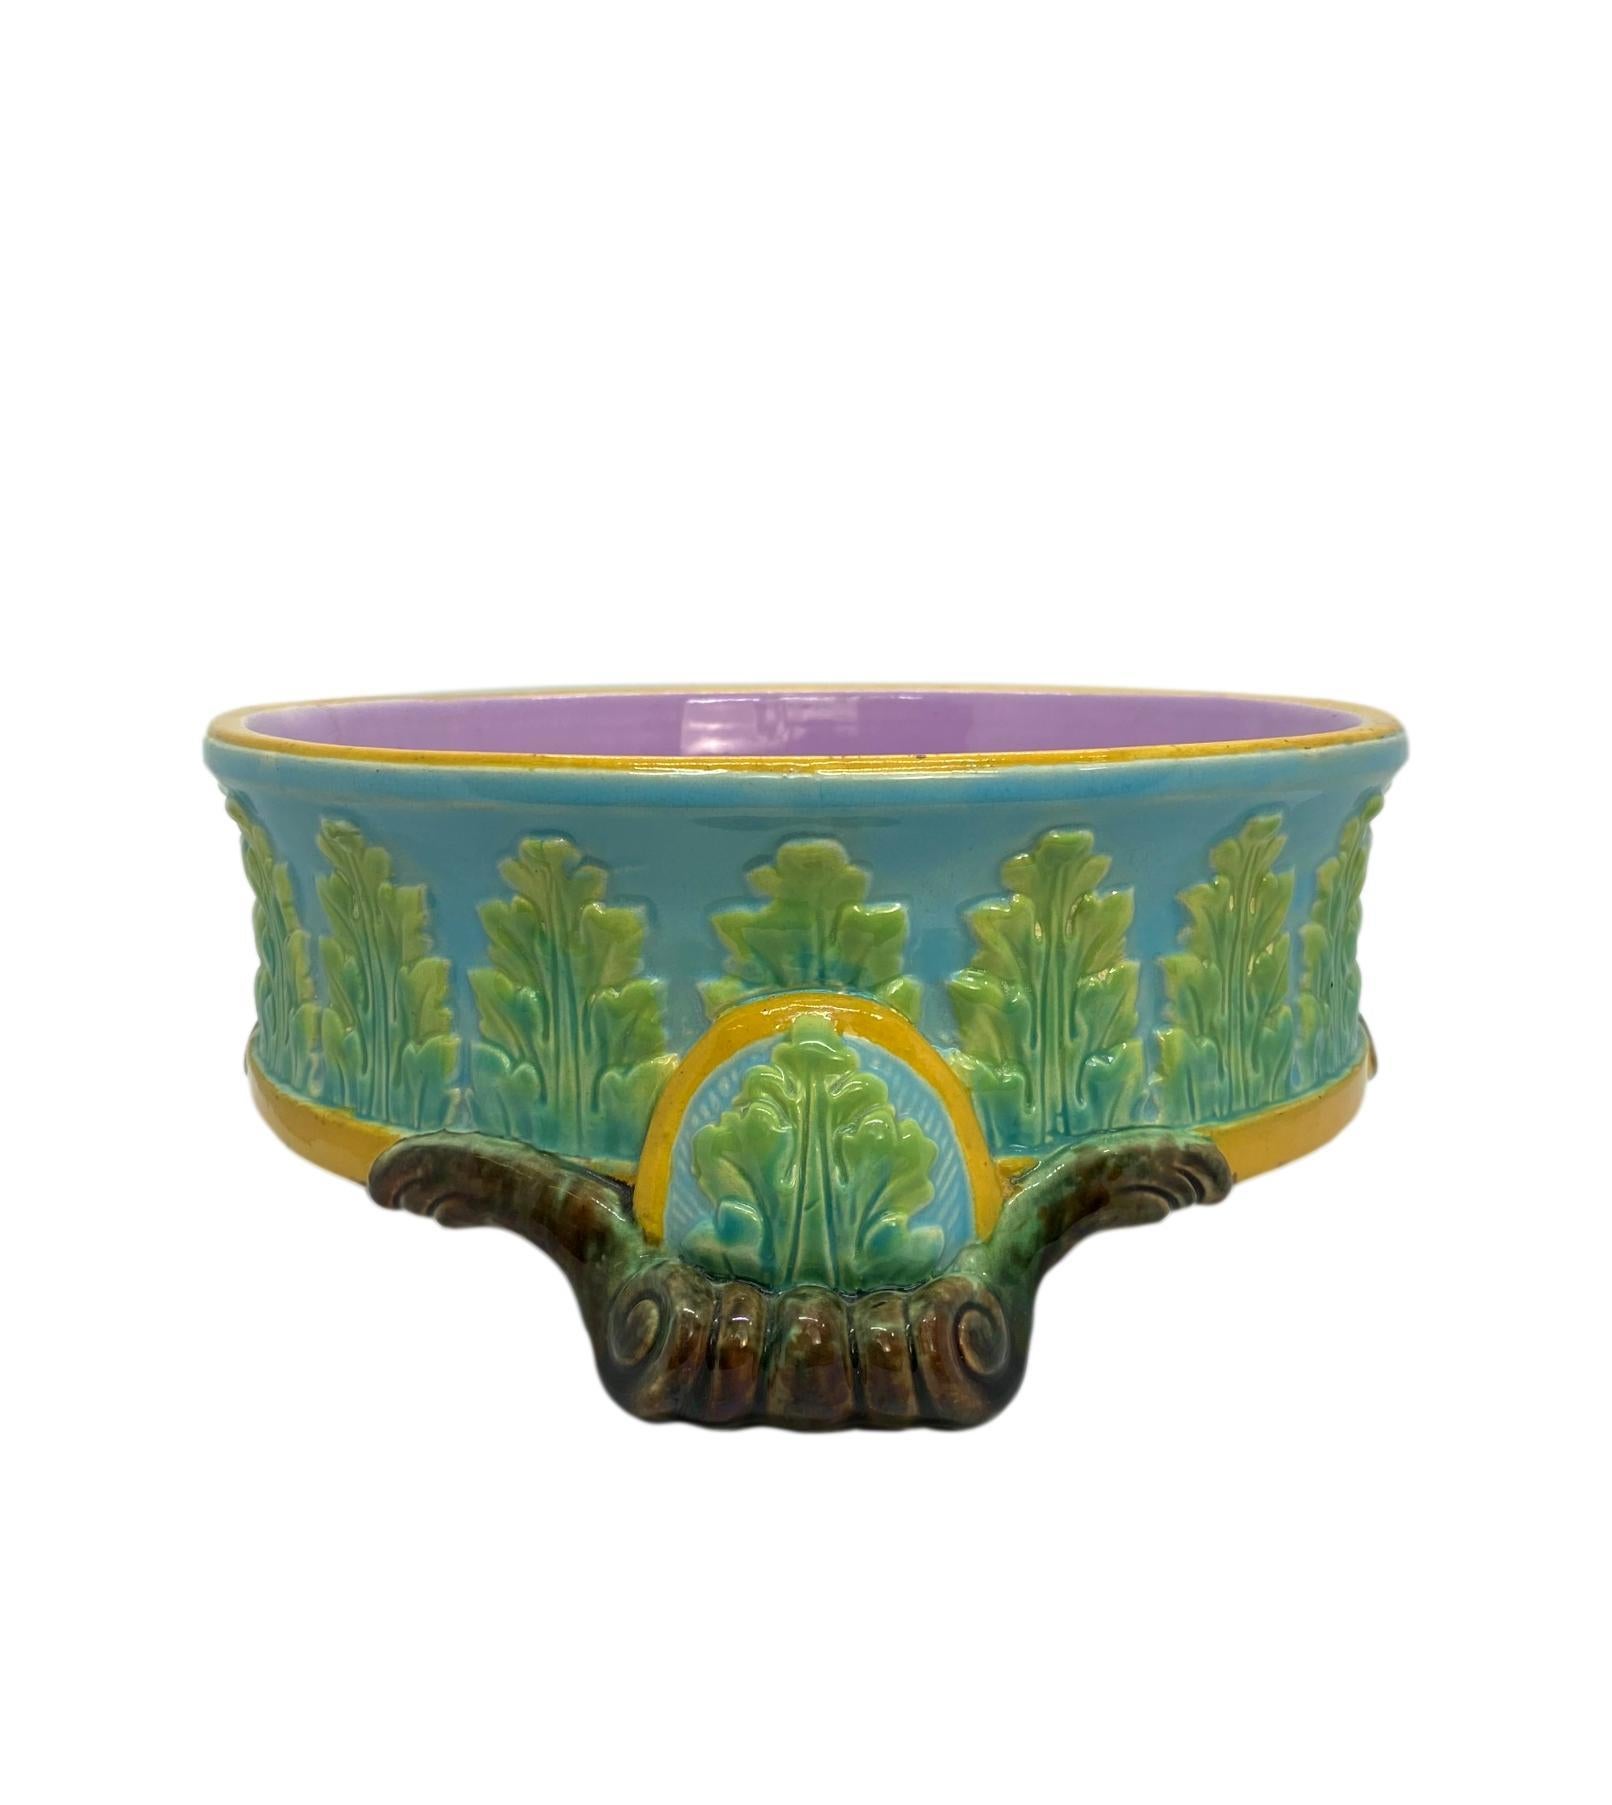 Victorian George Jones Majolica Dog Bowl, Glazed in Turquoise, Pink Interior, Dated 1884